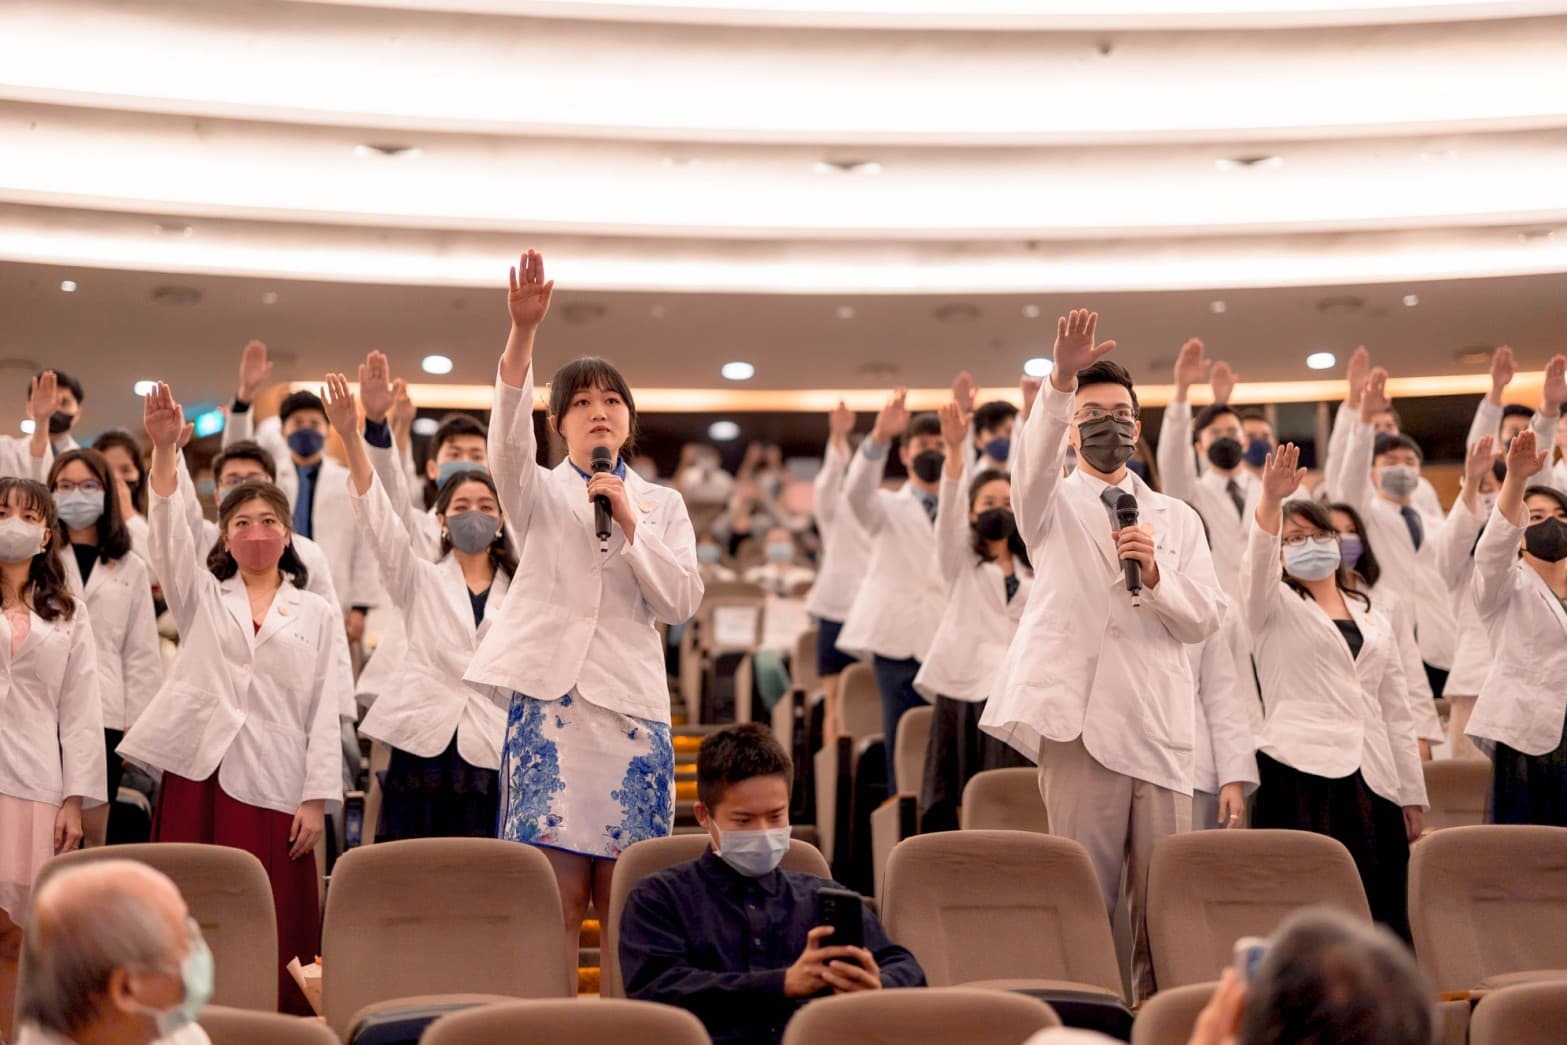 Raise the right hand and swear with the highest sincerity, to treat patients like your own family.